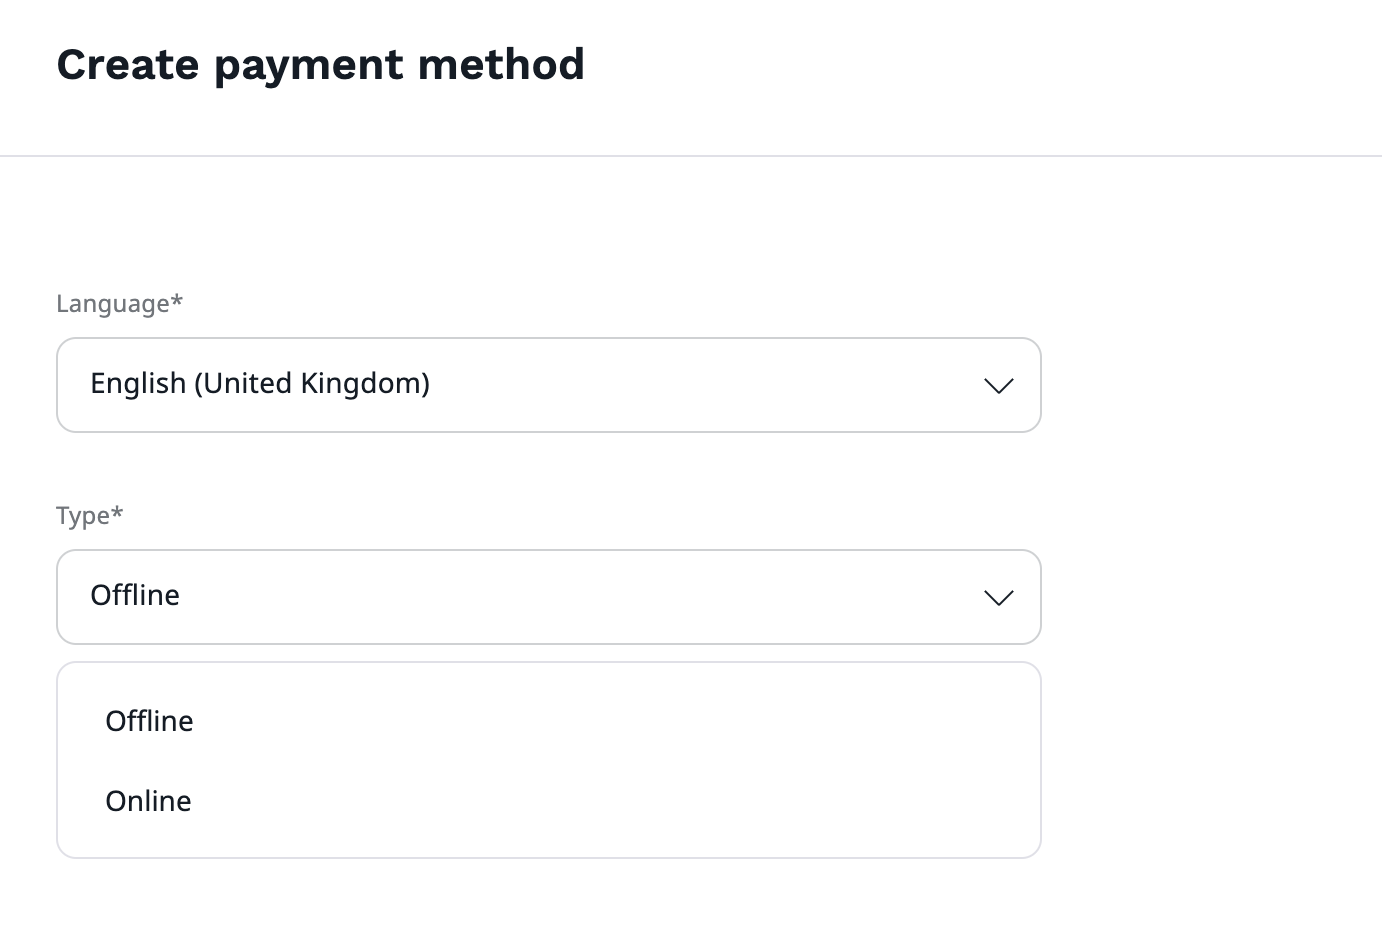 New payment method